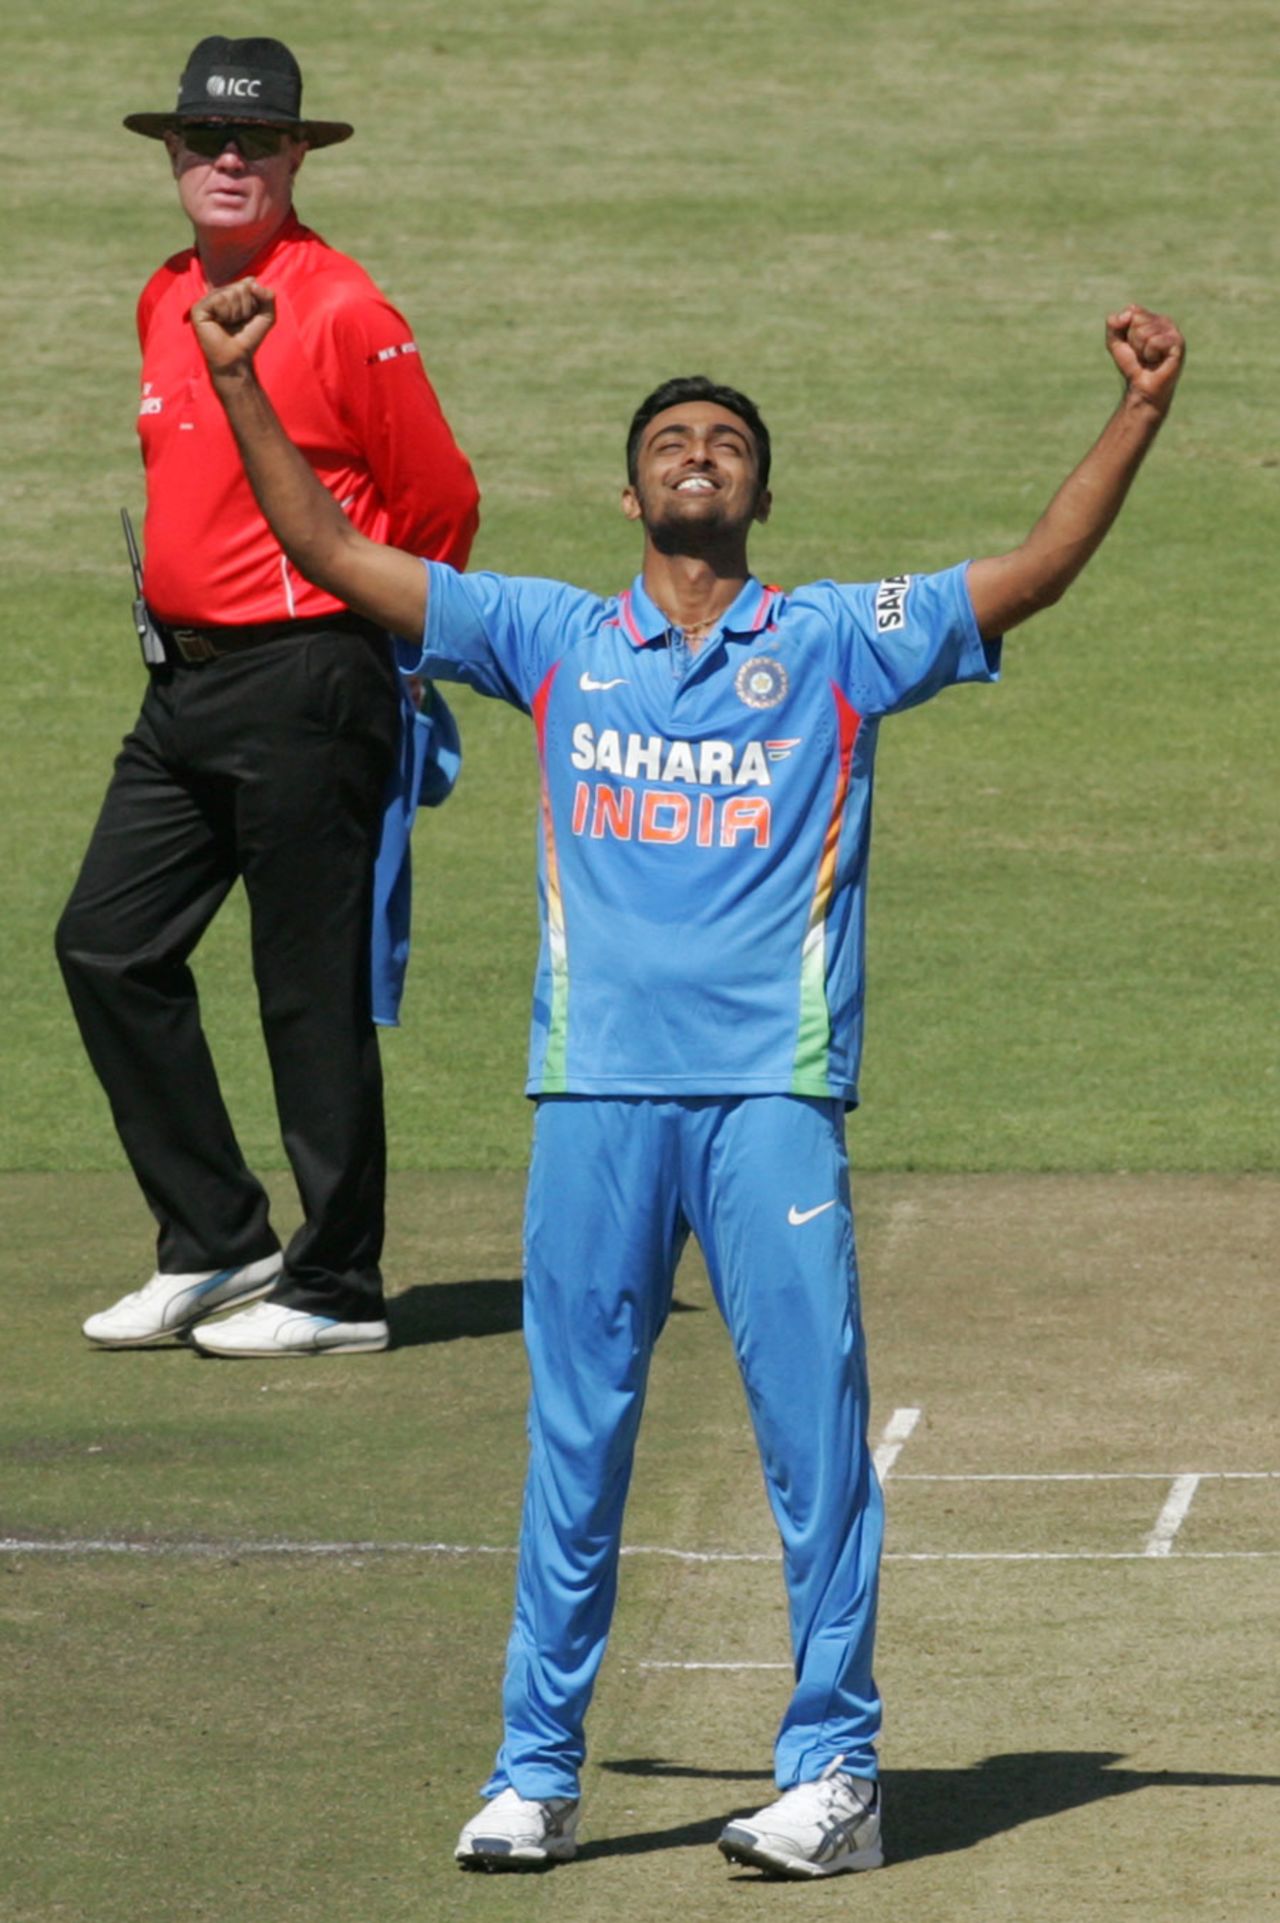 Jaydev Unadkat is elated after picking up his first ODI wicket, Zimbabwe v India, 1st ODI, Harare, July 24, 2013